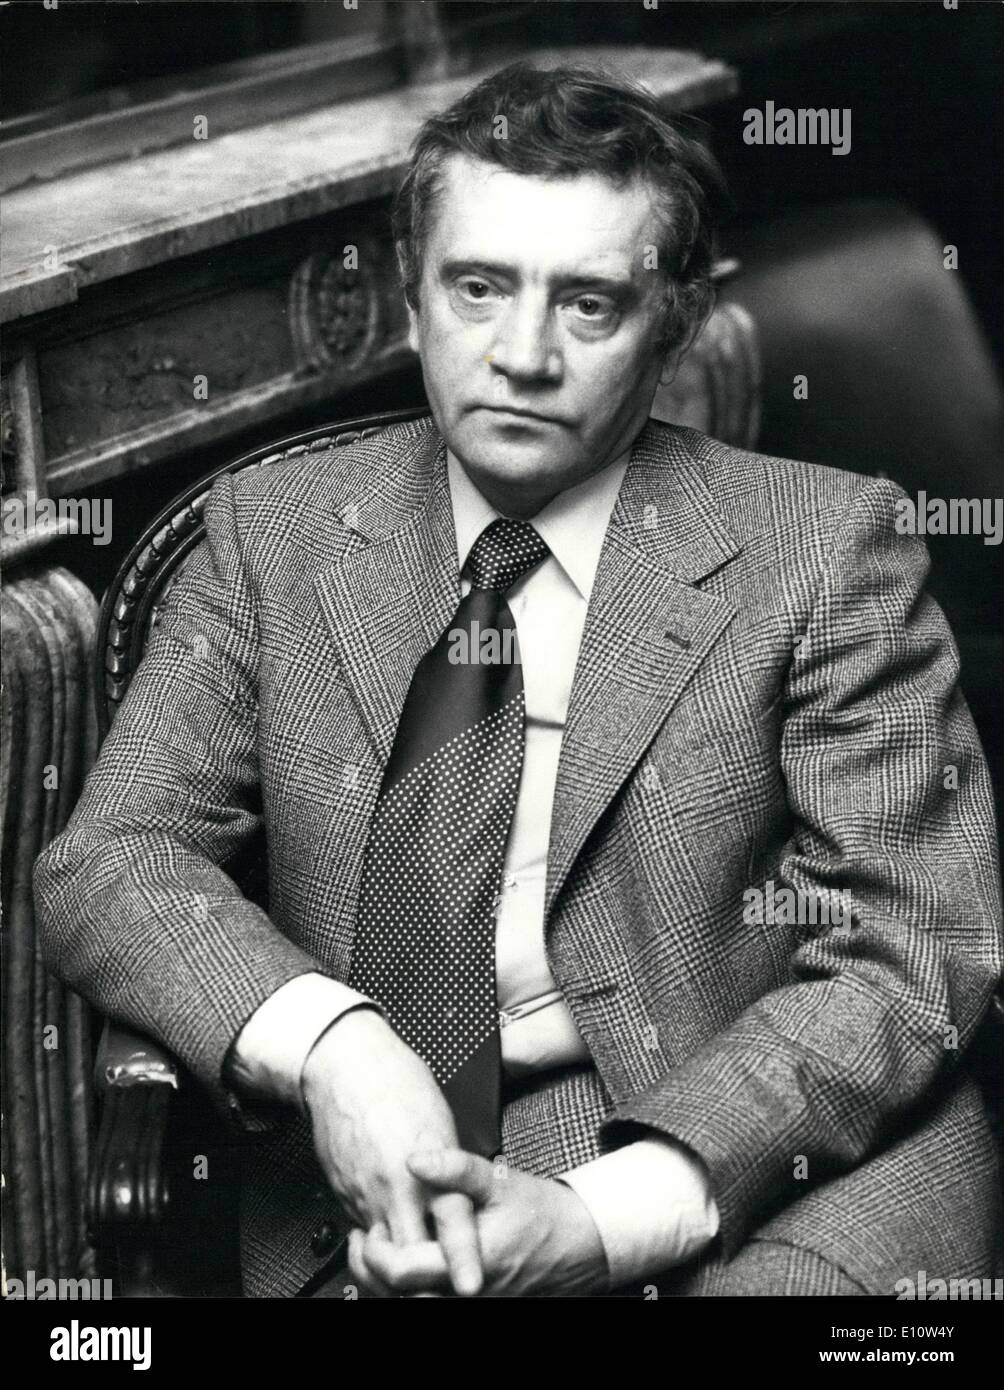 Apr. 04, 1974 - SOVIET AUTHOR WHO CONSIDERS HIMSELF EXPELLED FROM RUSSIA ARRIVES IN LONDON. VLADIMIR MAXIMOV, the dissident Soviet author of the novel ''THE SEVEN DAYS OF CREATION'' arrived In London accompanied by his wife. The 44-year-old writer who left Russia last month when, after months of persecution, the authorities granted him and his wife a one-year exit visa. But exclaimed VLADIMIR; ''This is a camouflaged expulsion.'' He is in Britain at the invitation of the London publishers of his book which has been widely acclaimed in France and Germany Stock Photo